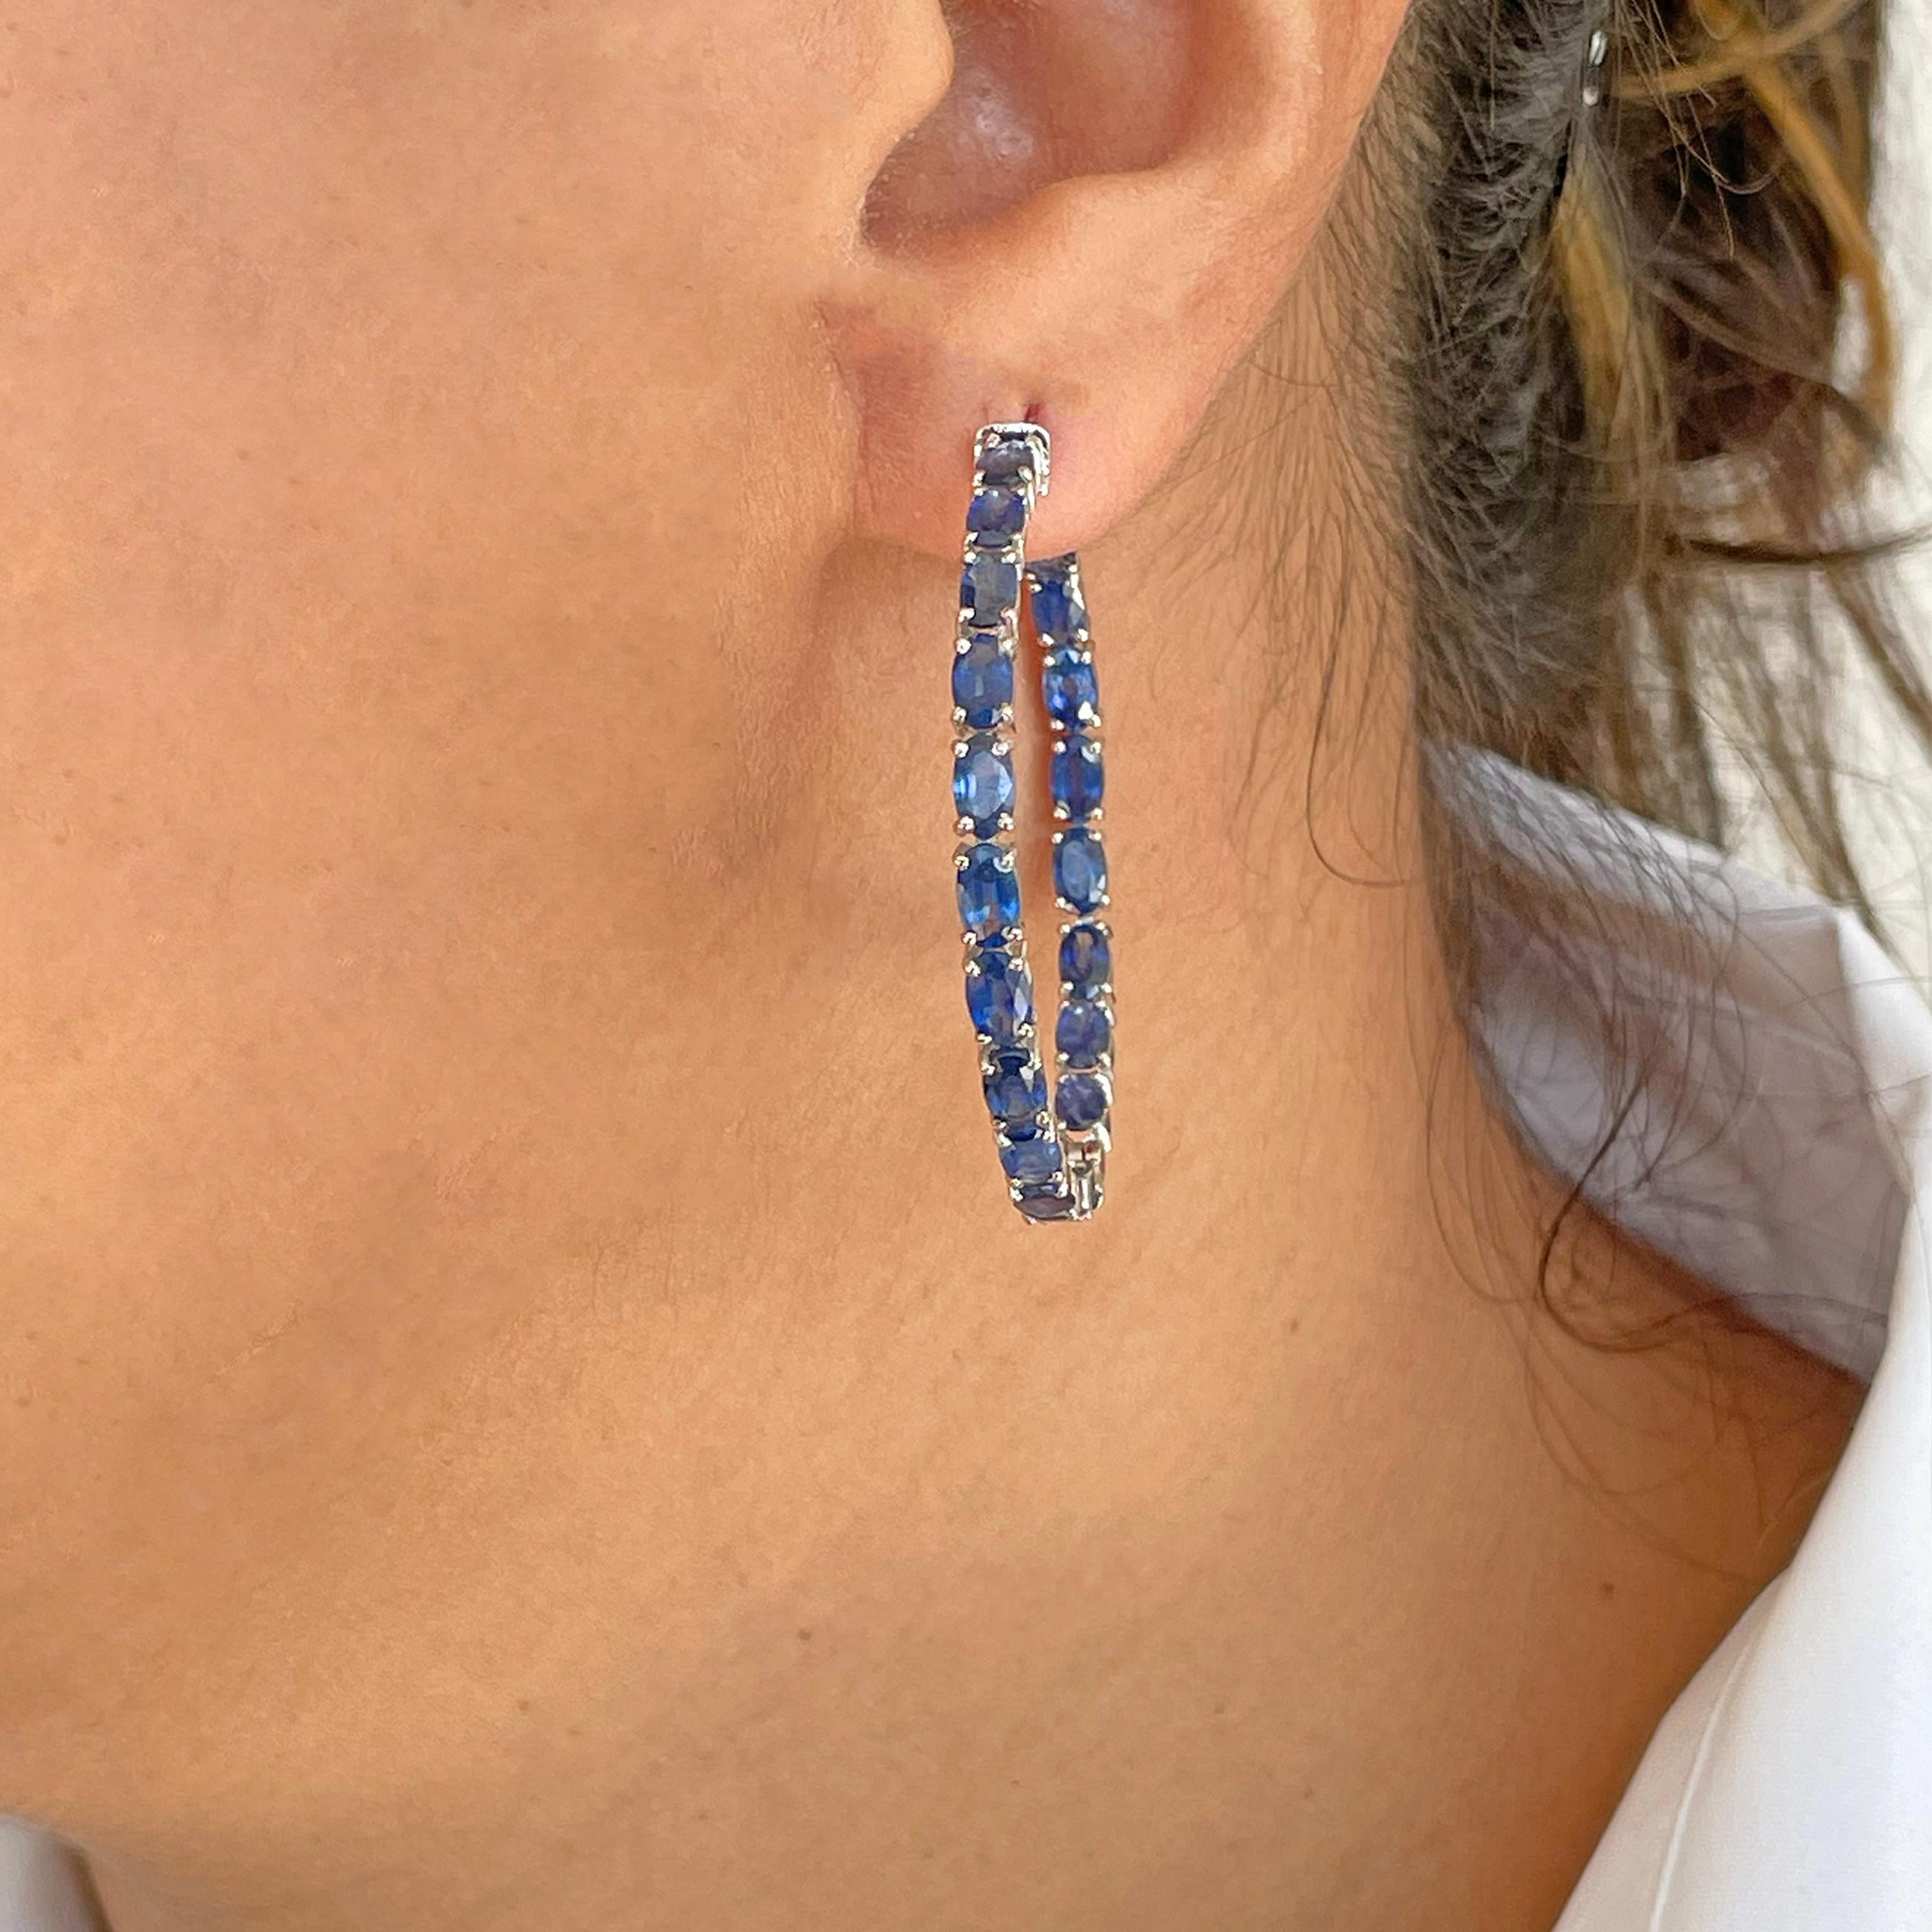 18 karat white gold 8.62 carats oval natural blue sapphire hoop earrings. 

This enchanting full hoop earrings featuring natural blue sapphires is impressive. The hoop is created with 40 perfect matching oval cut blue sapphires of size 5x3 mm each.